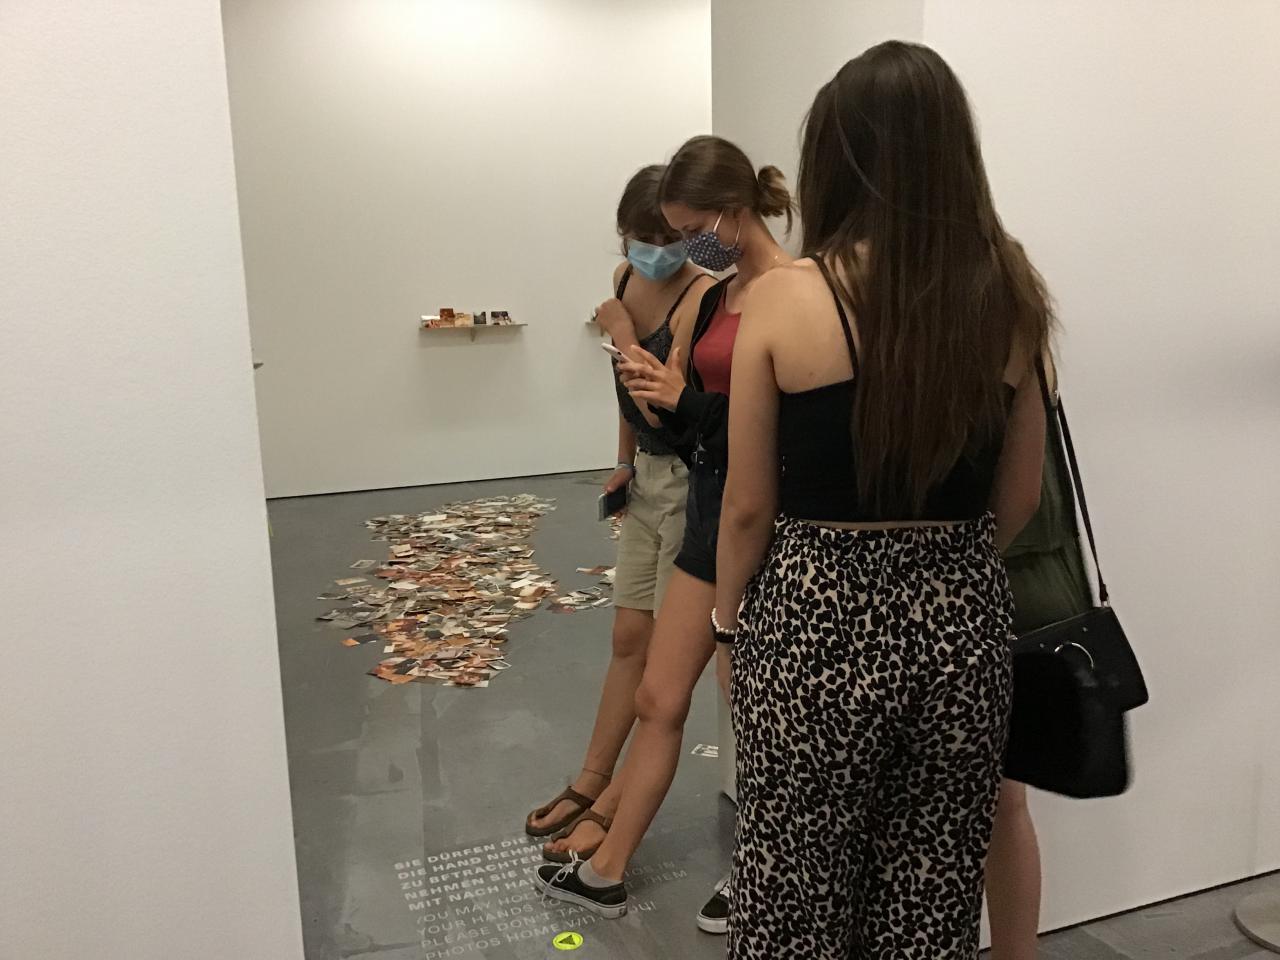 You can see three girls who have put their feet on a text on the floor and take a photo of it.